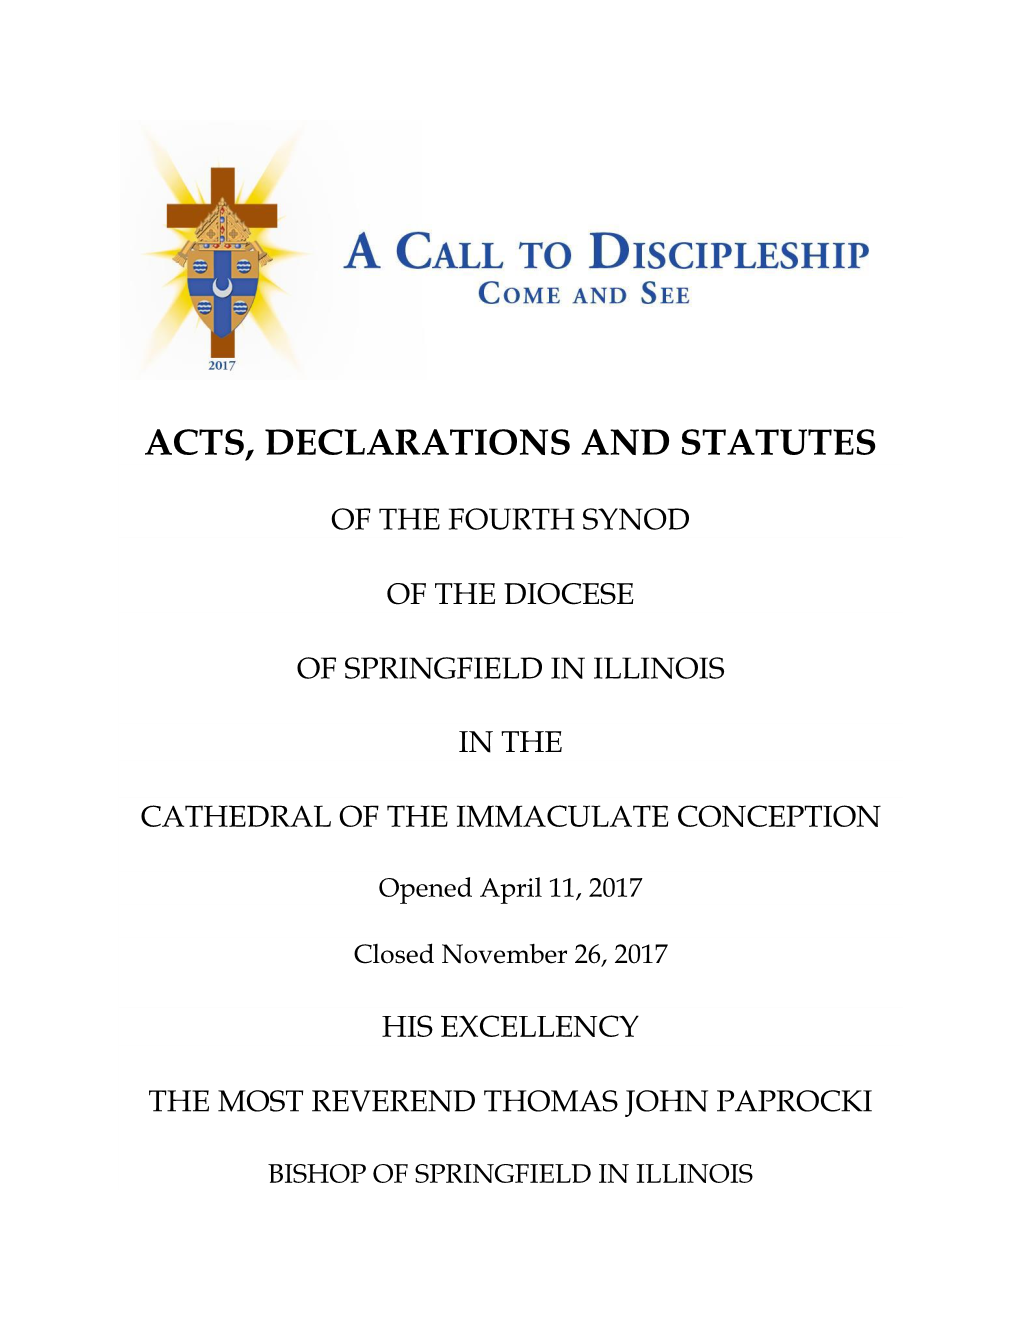 Download the Synodal Acts, Declarations and Statutes